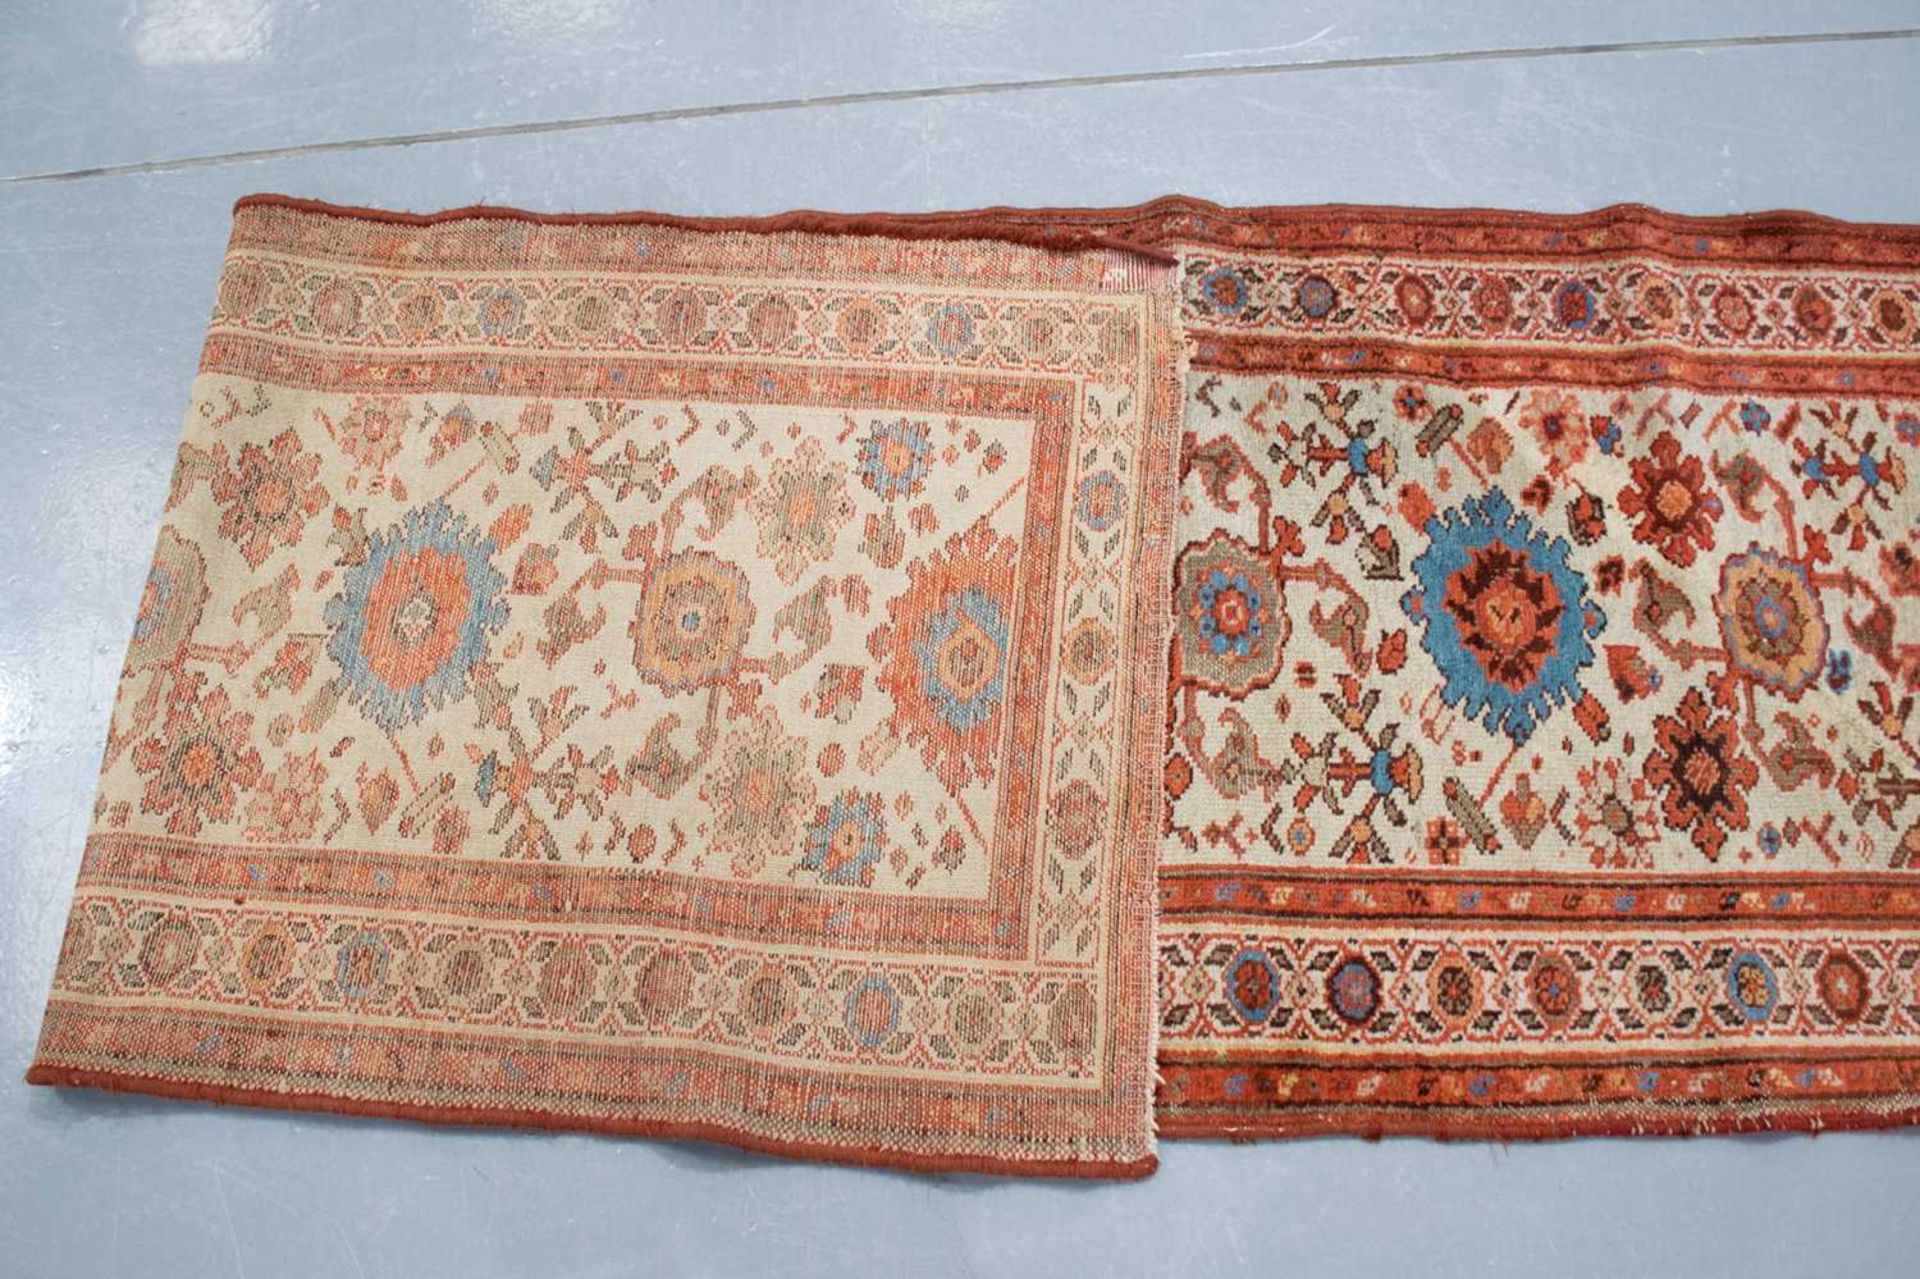 An "Old Country House" ivory ground Malayer runner with large flower heads, within a tiled border, r - Image 3 of 3